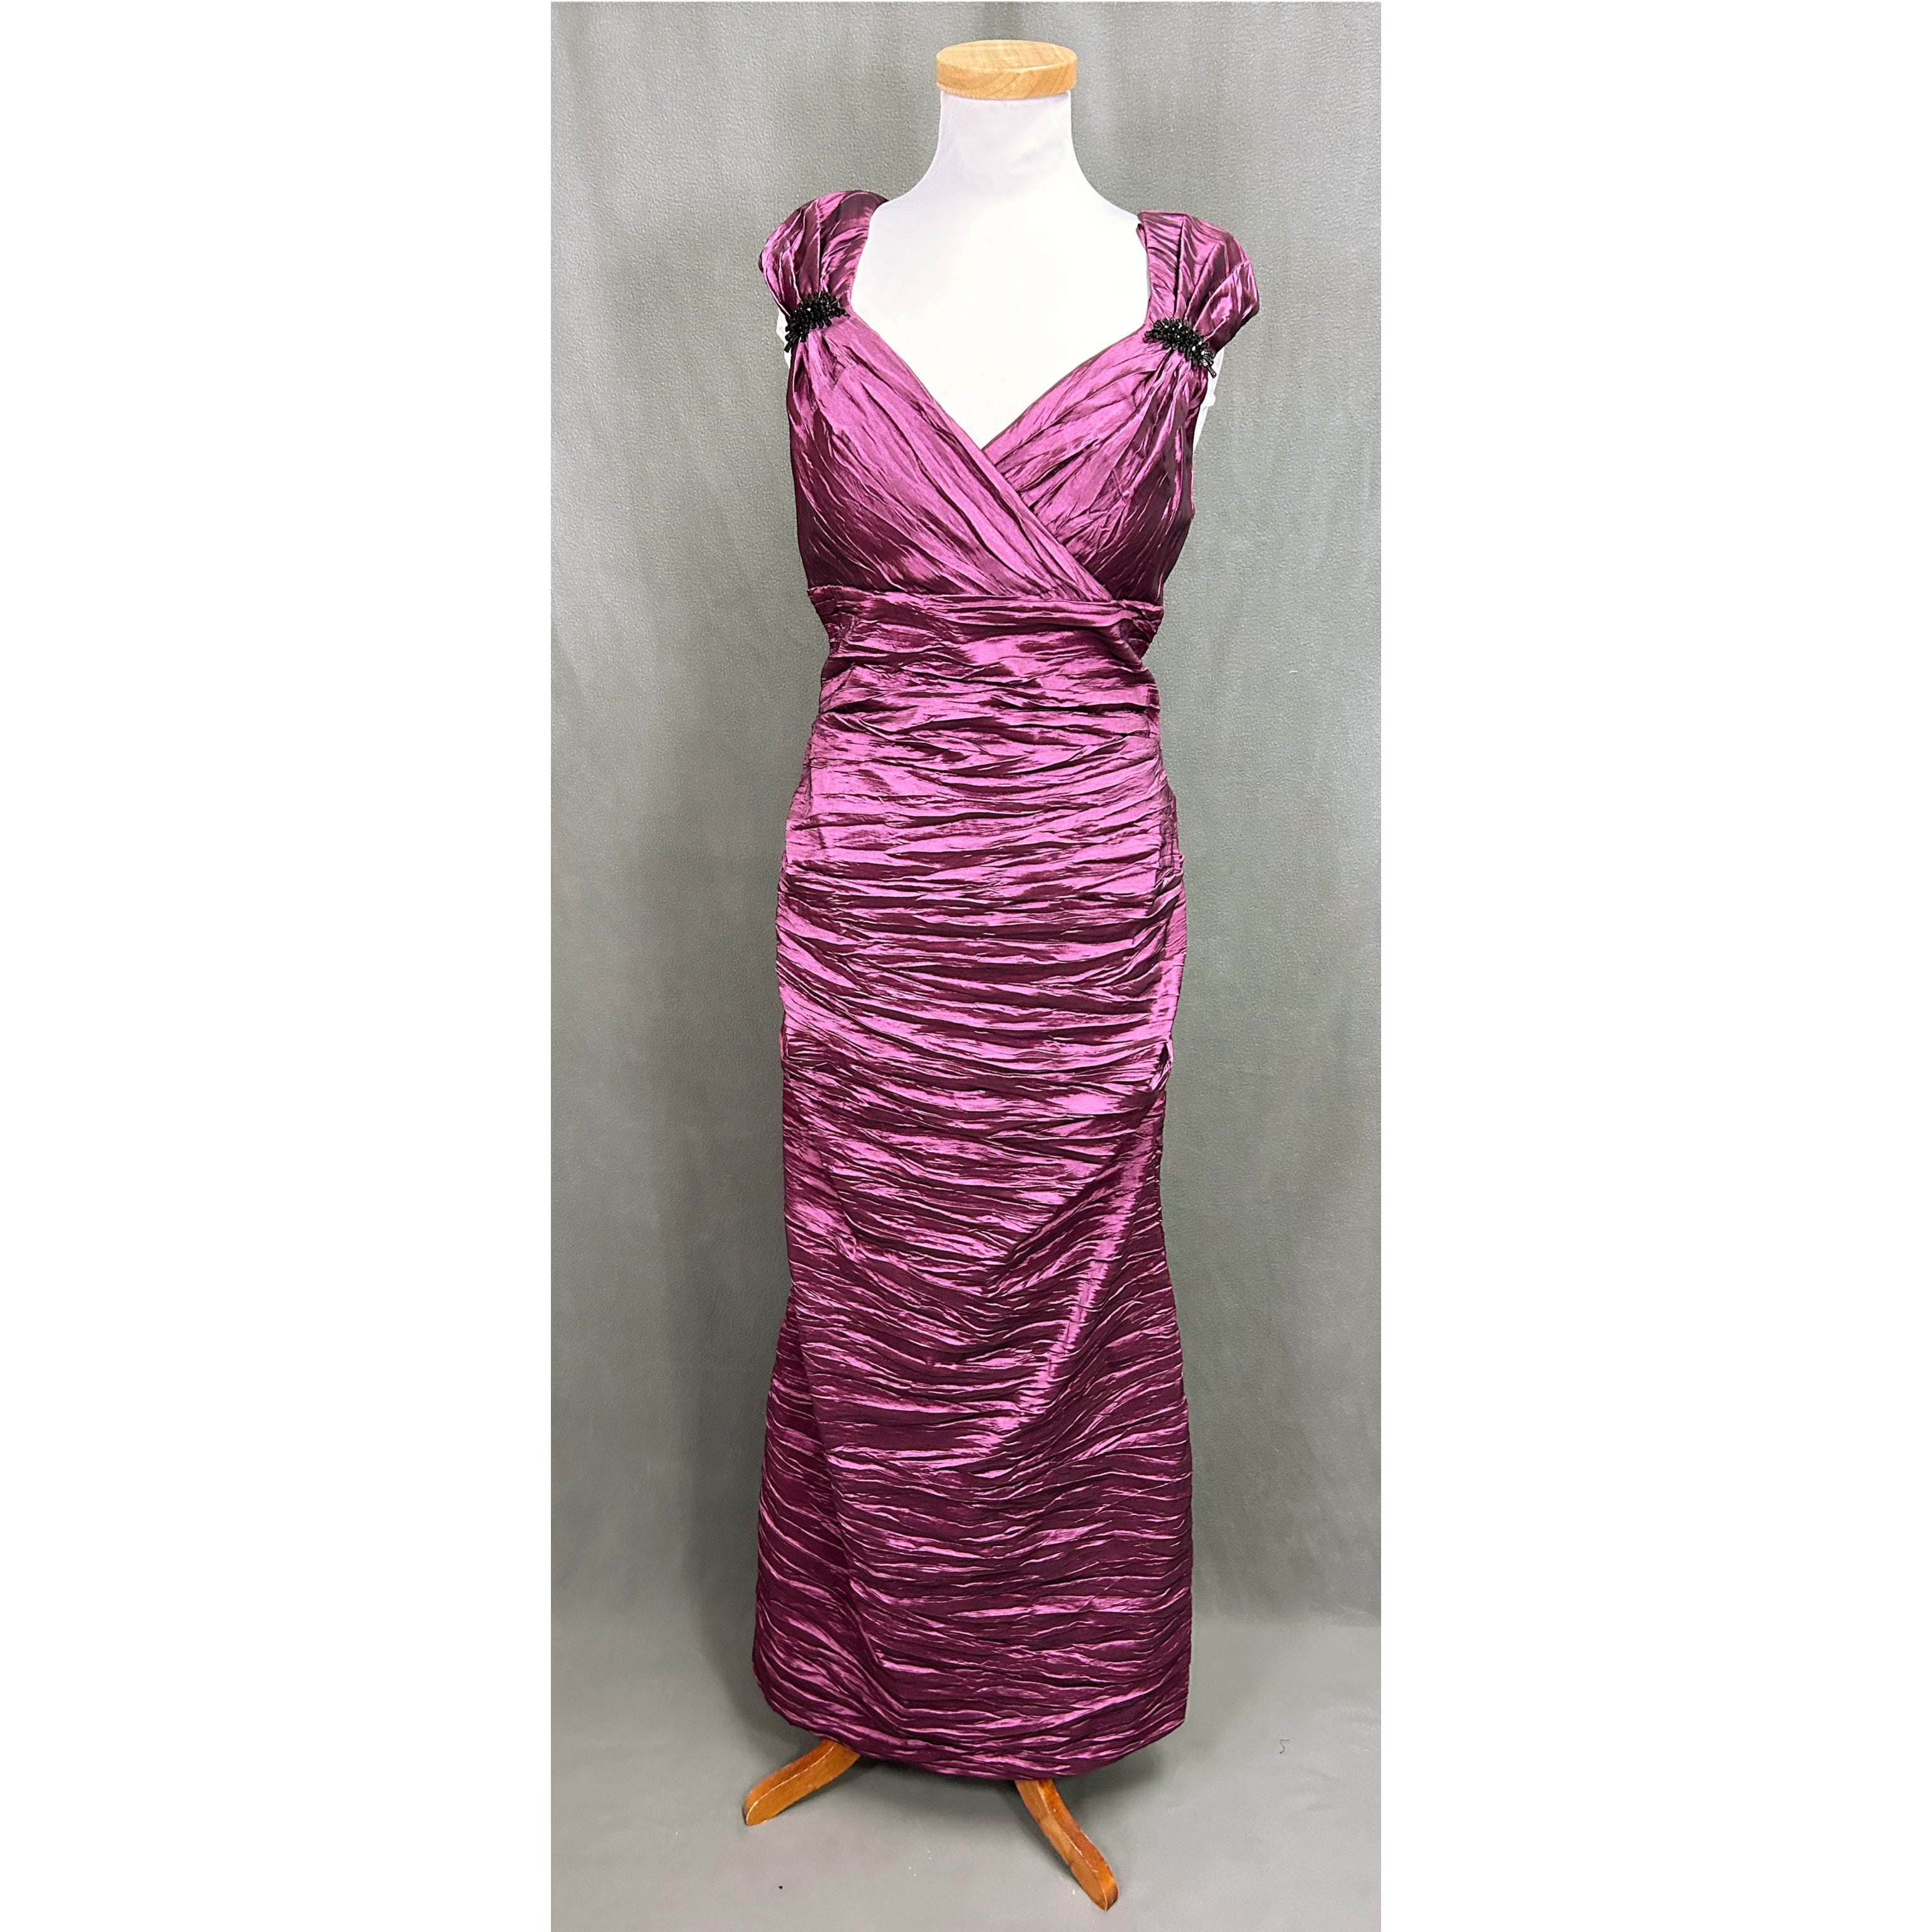 Alex Evenings plum dress, sizes 8 & 12, NEW WITH TAGS!